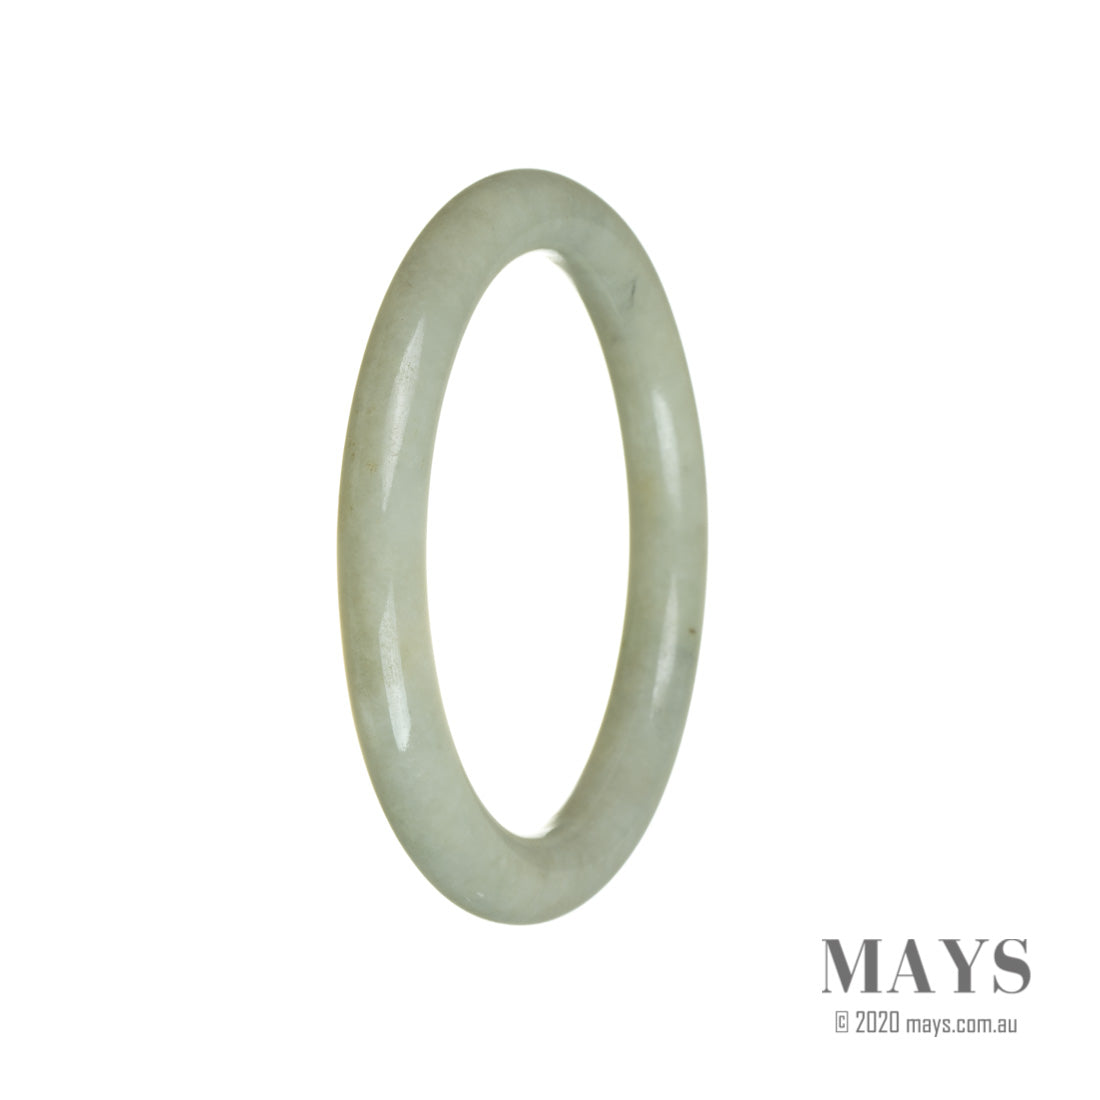 A real untreated light green jade bangle, oval-shaped, measuring 60mm in diameter. Offered by MAYS™.